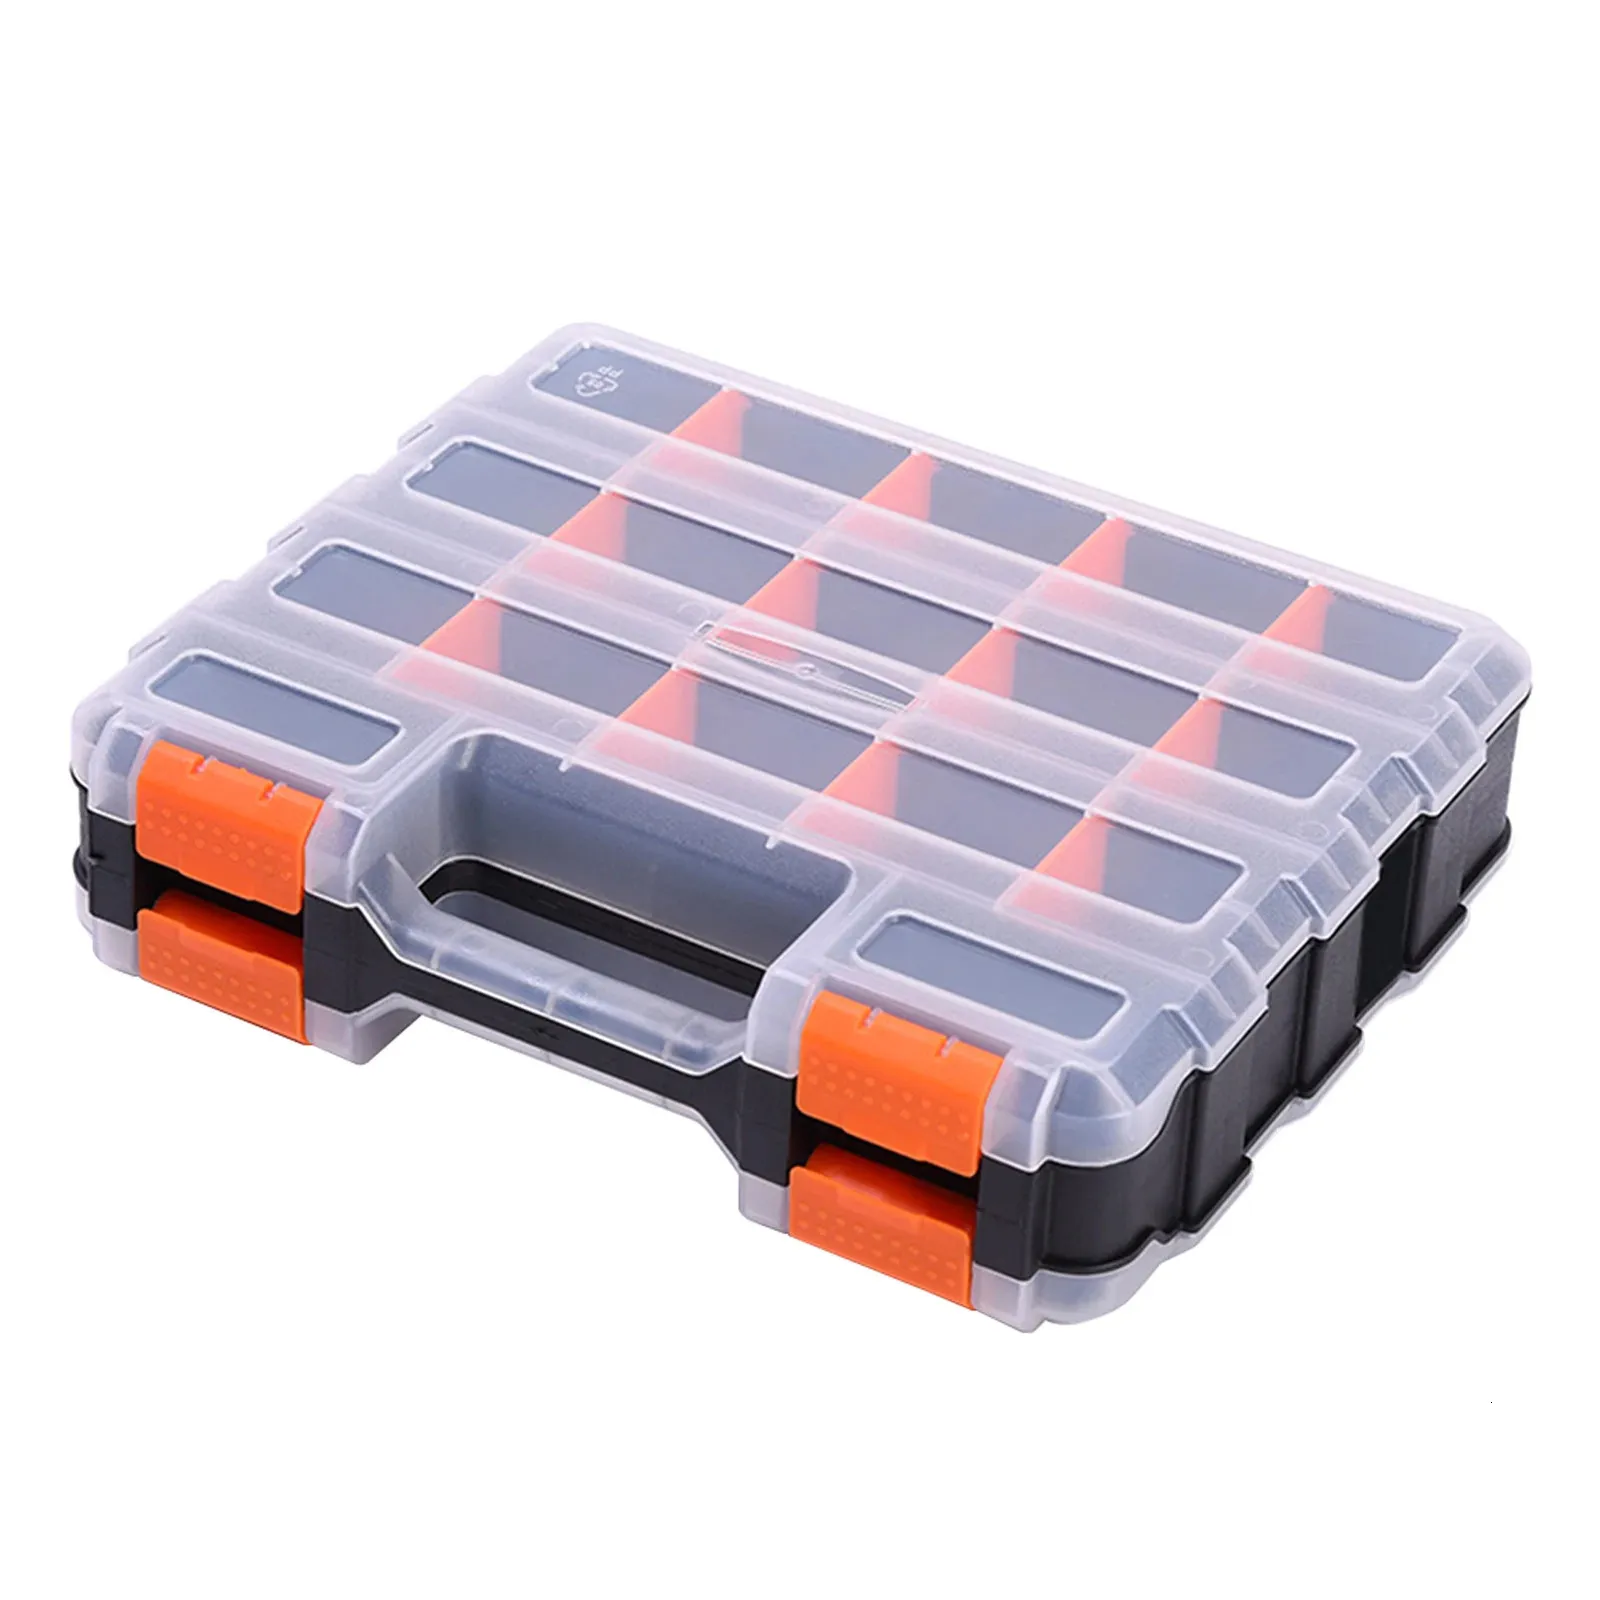 Tool Box Plastic Double Sided Nuts Portable Hardware Storage Case For  Screws Durable Nails Removable Dividers Bolts Tool Box Organizer 231213  From Lian10, $26.99